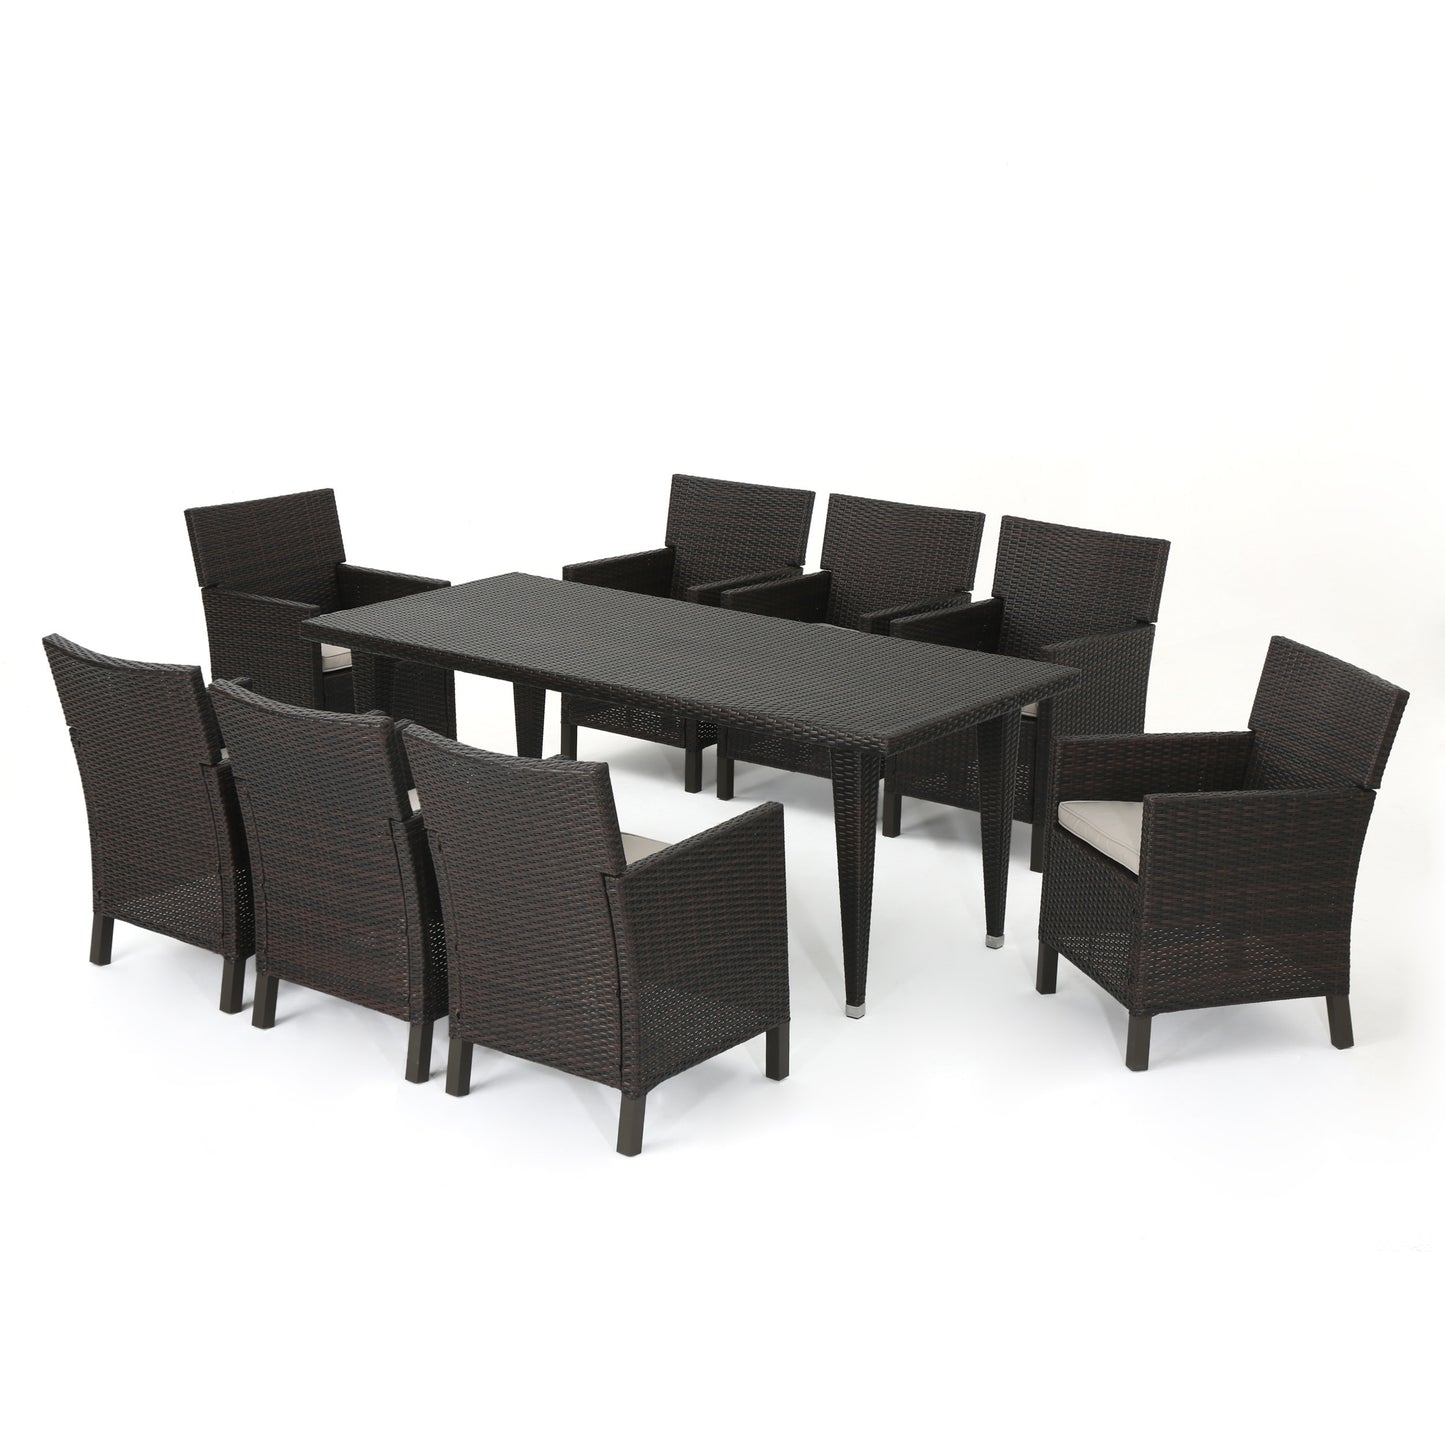 Cerrenne Outdoor 9 Piece Wicker Dining Set with Water Resistant Cushions